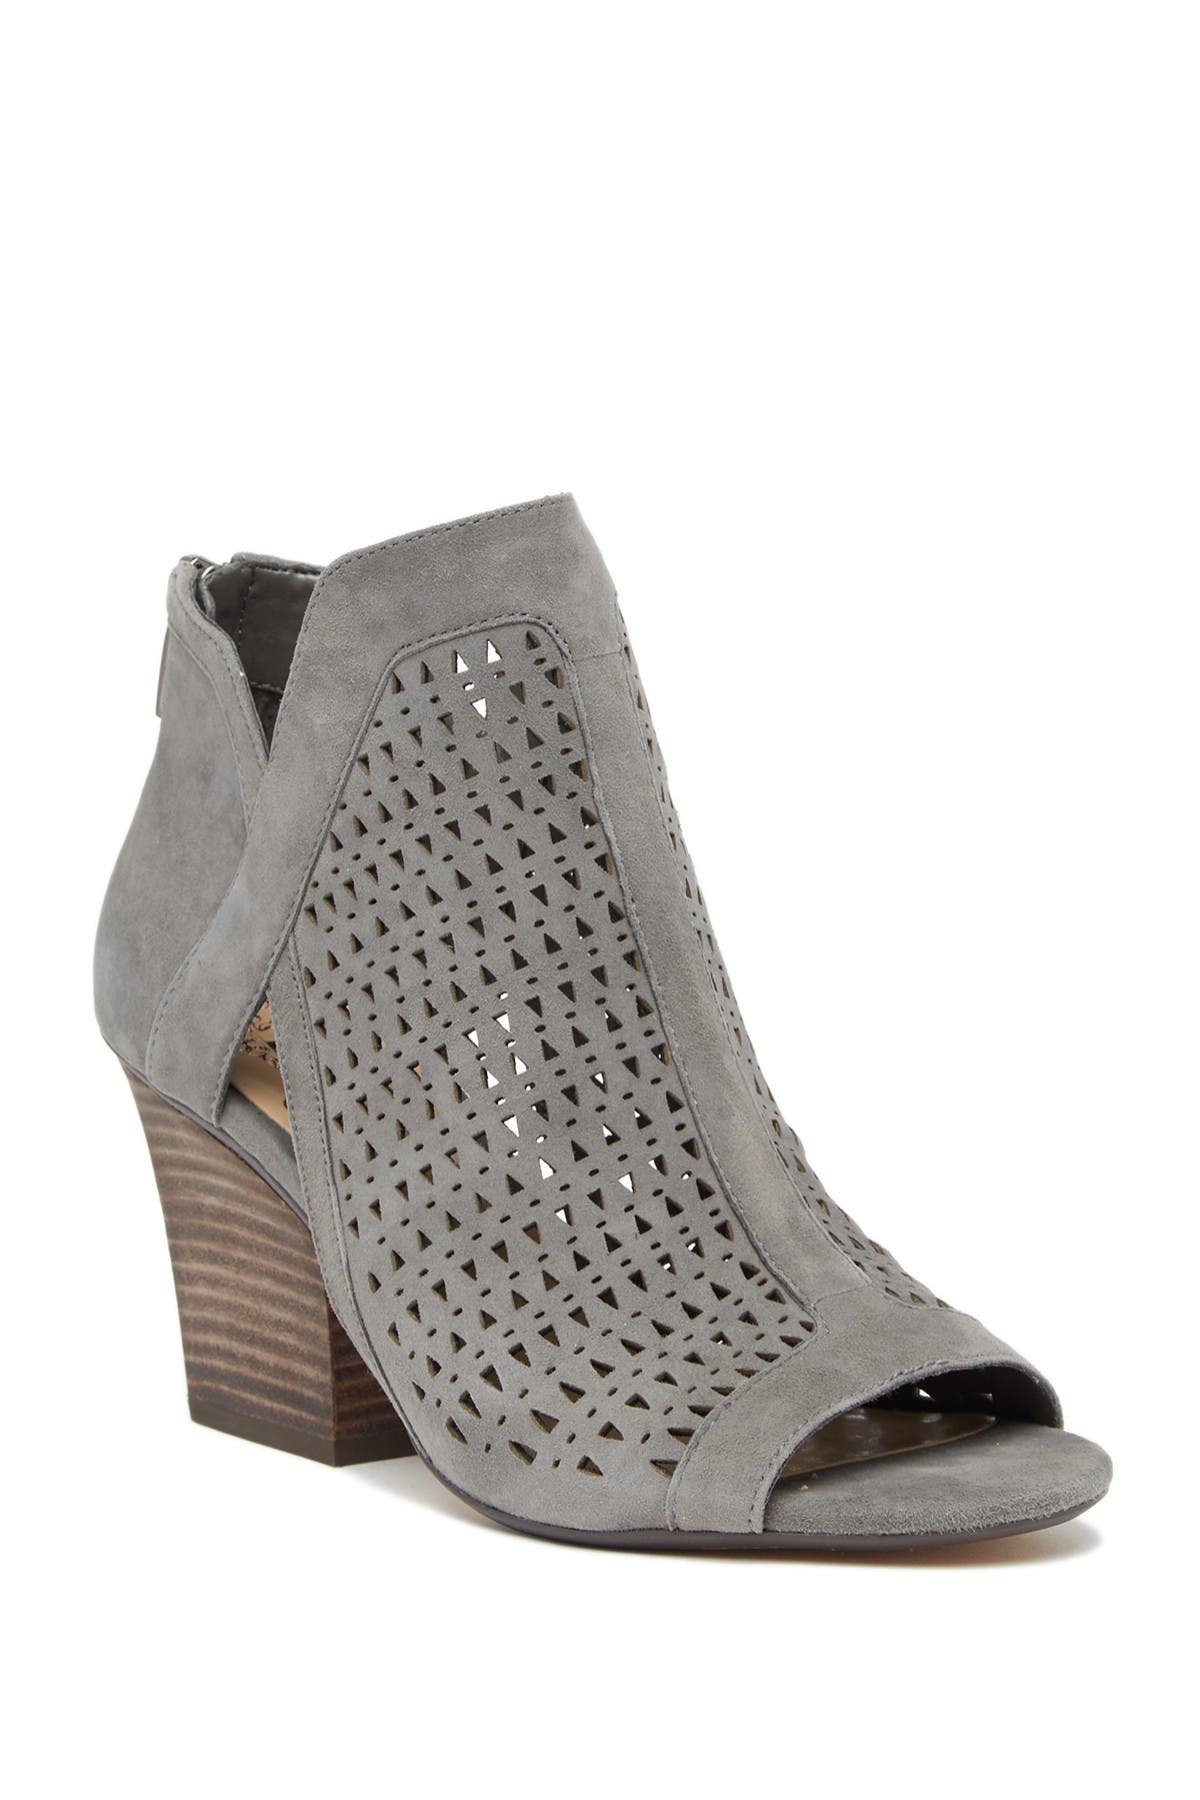 Vince Camuto | Cachinta Open Toe Suede 